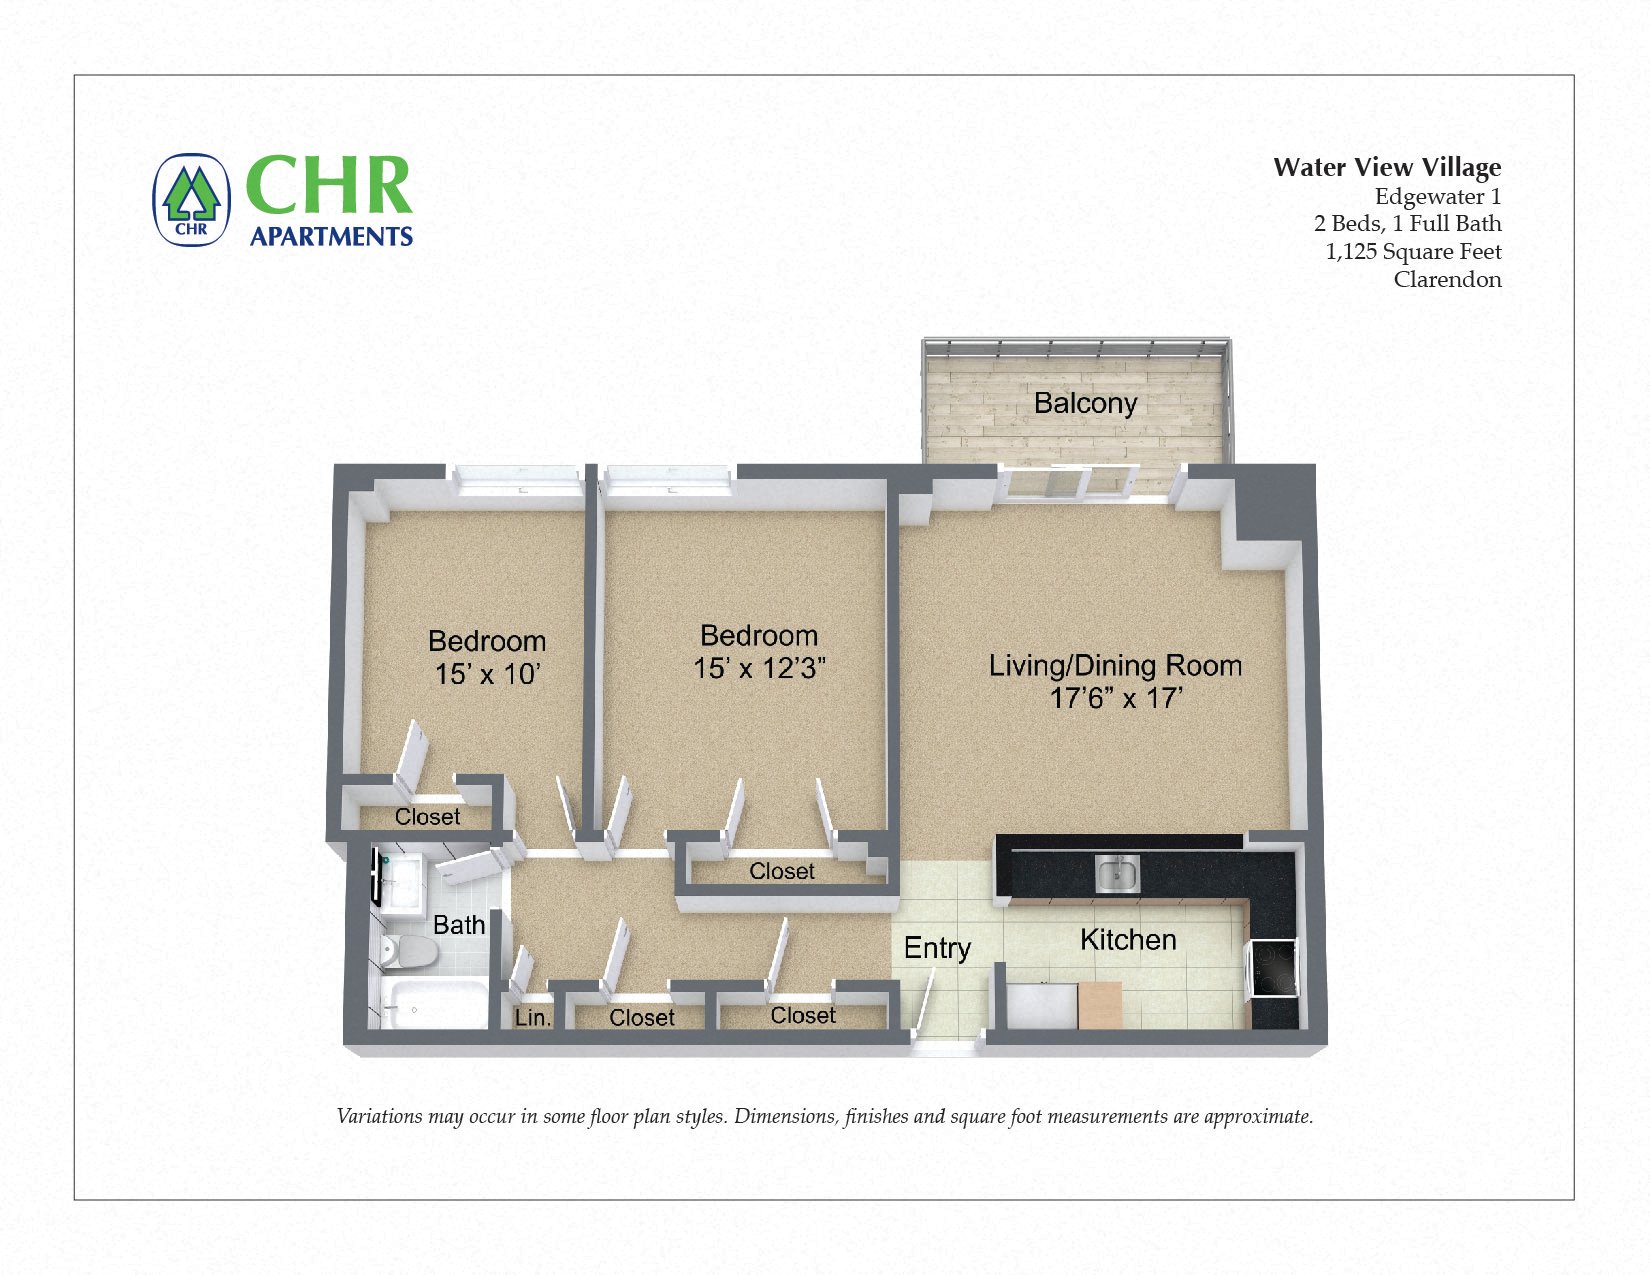 Click to view 2 Bed/1 Bath with Balcony floor plan gallery